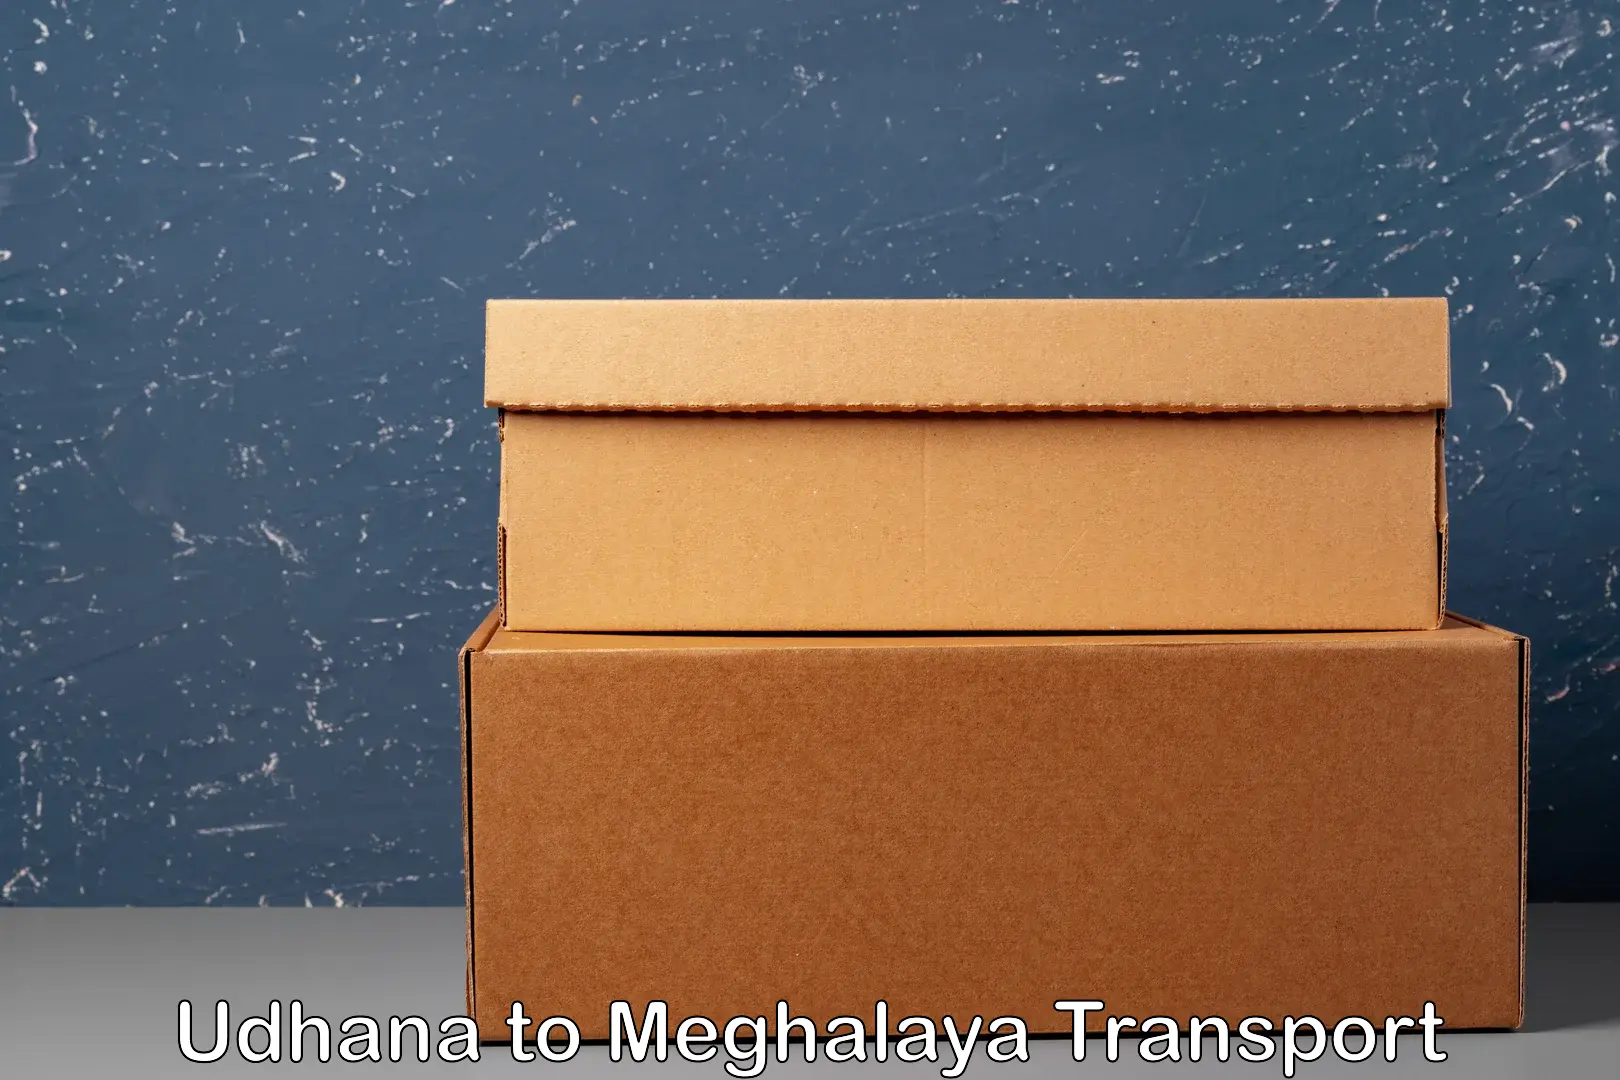 Truck transport companies in India Udhana to Tura